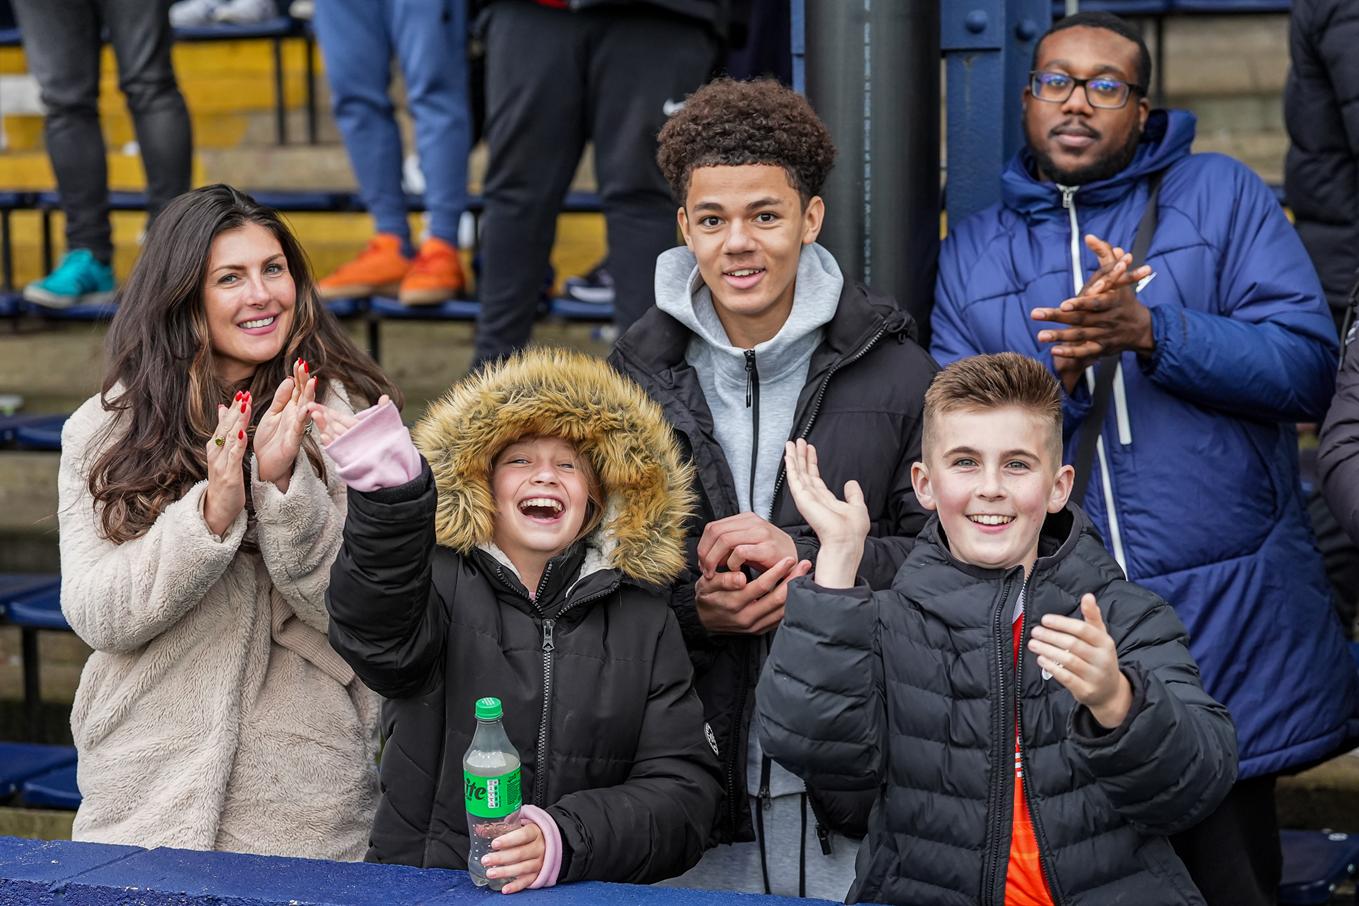 A group of Luton fans smiling and waving at the camera in the Main Stand enclosure at Kenilworth Road.